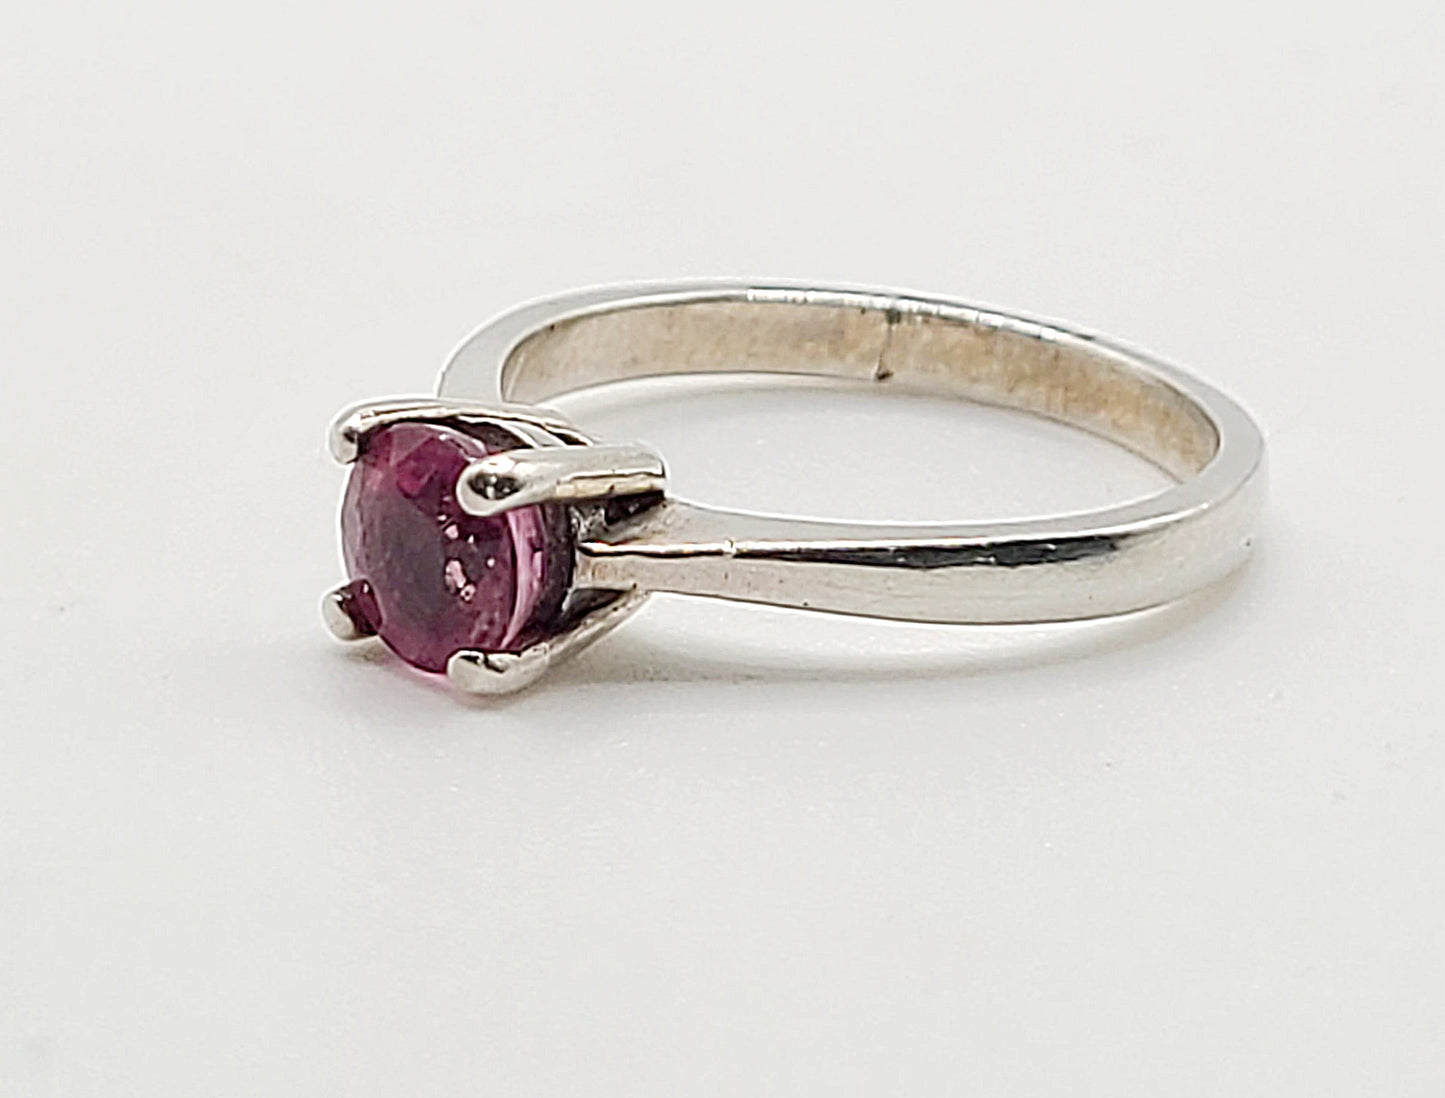 Round Cut Pink Tourmaline Solitaire on Sterling Silver Ring